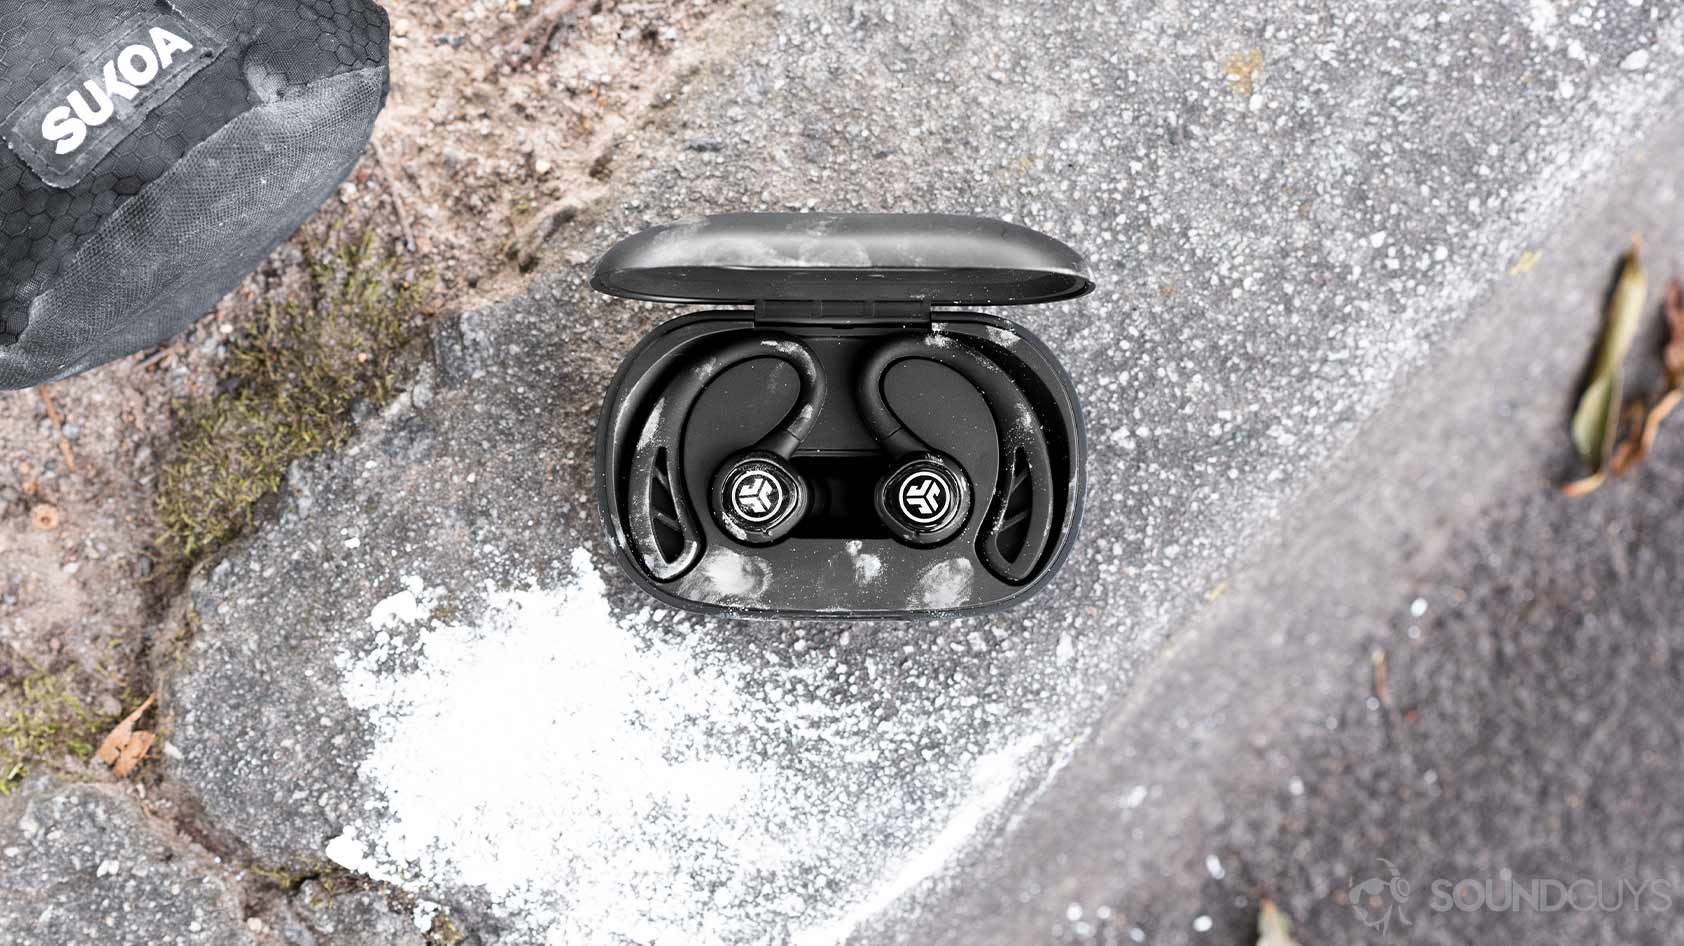 A picture of the JLab JBuds Air Sport, the more premium JLab JBuds Air Sport, in the charging case with rock climbing chalk on the curb surface.